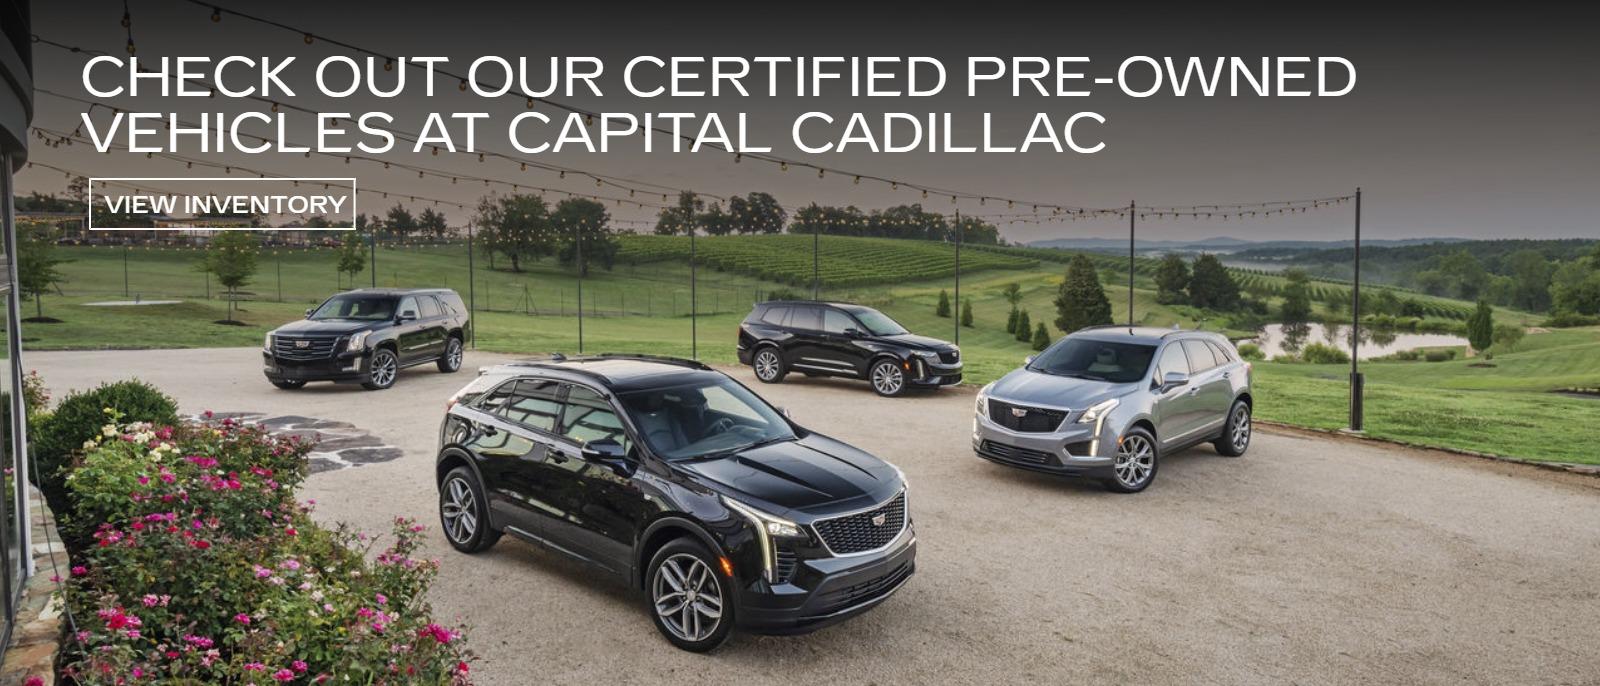 Check Out Our Certified Pre-Owned Vehicles at Capital Cadillac Of Atlanta